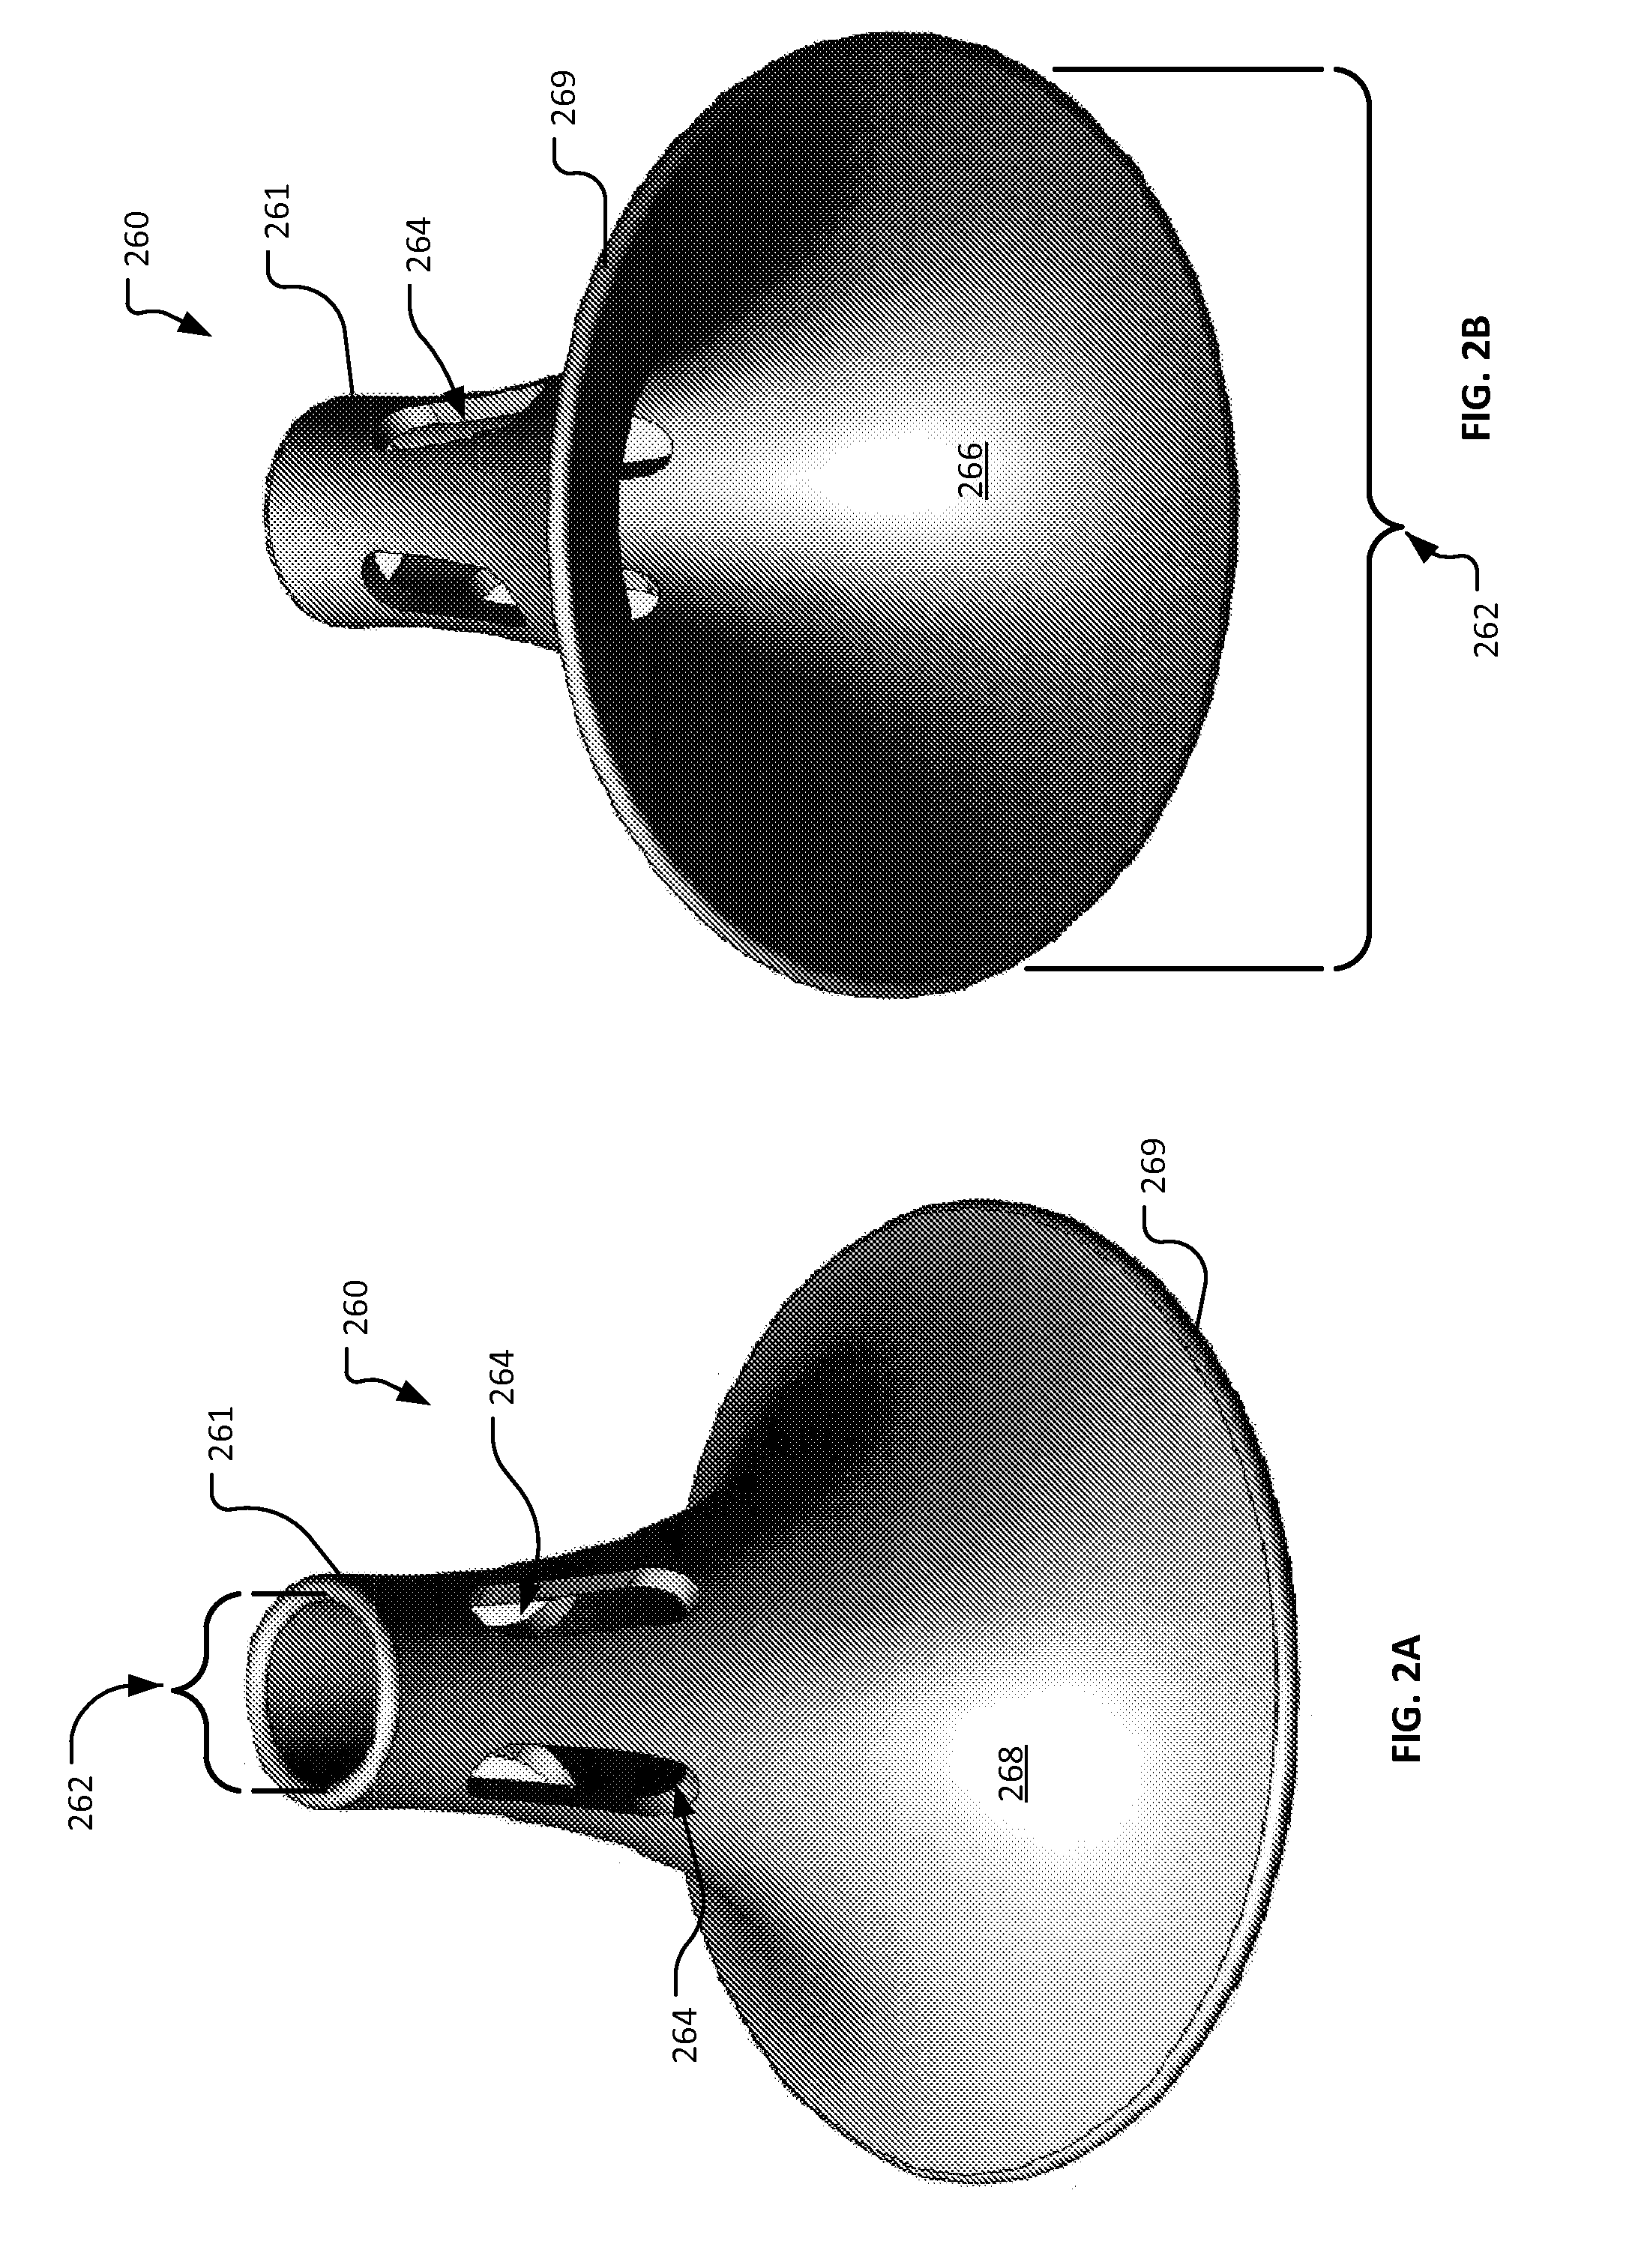 Device and methods for self-centering a guide catheter